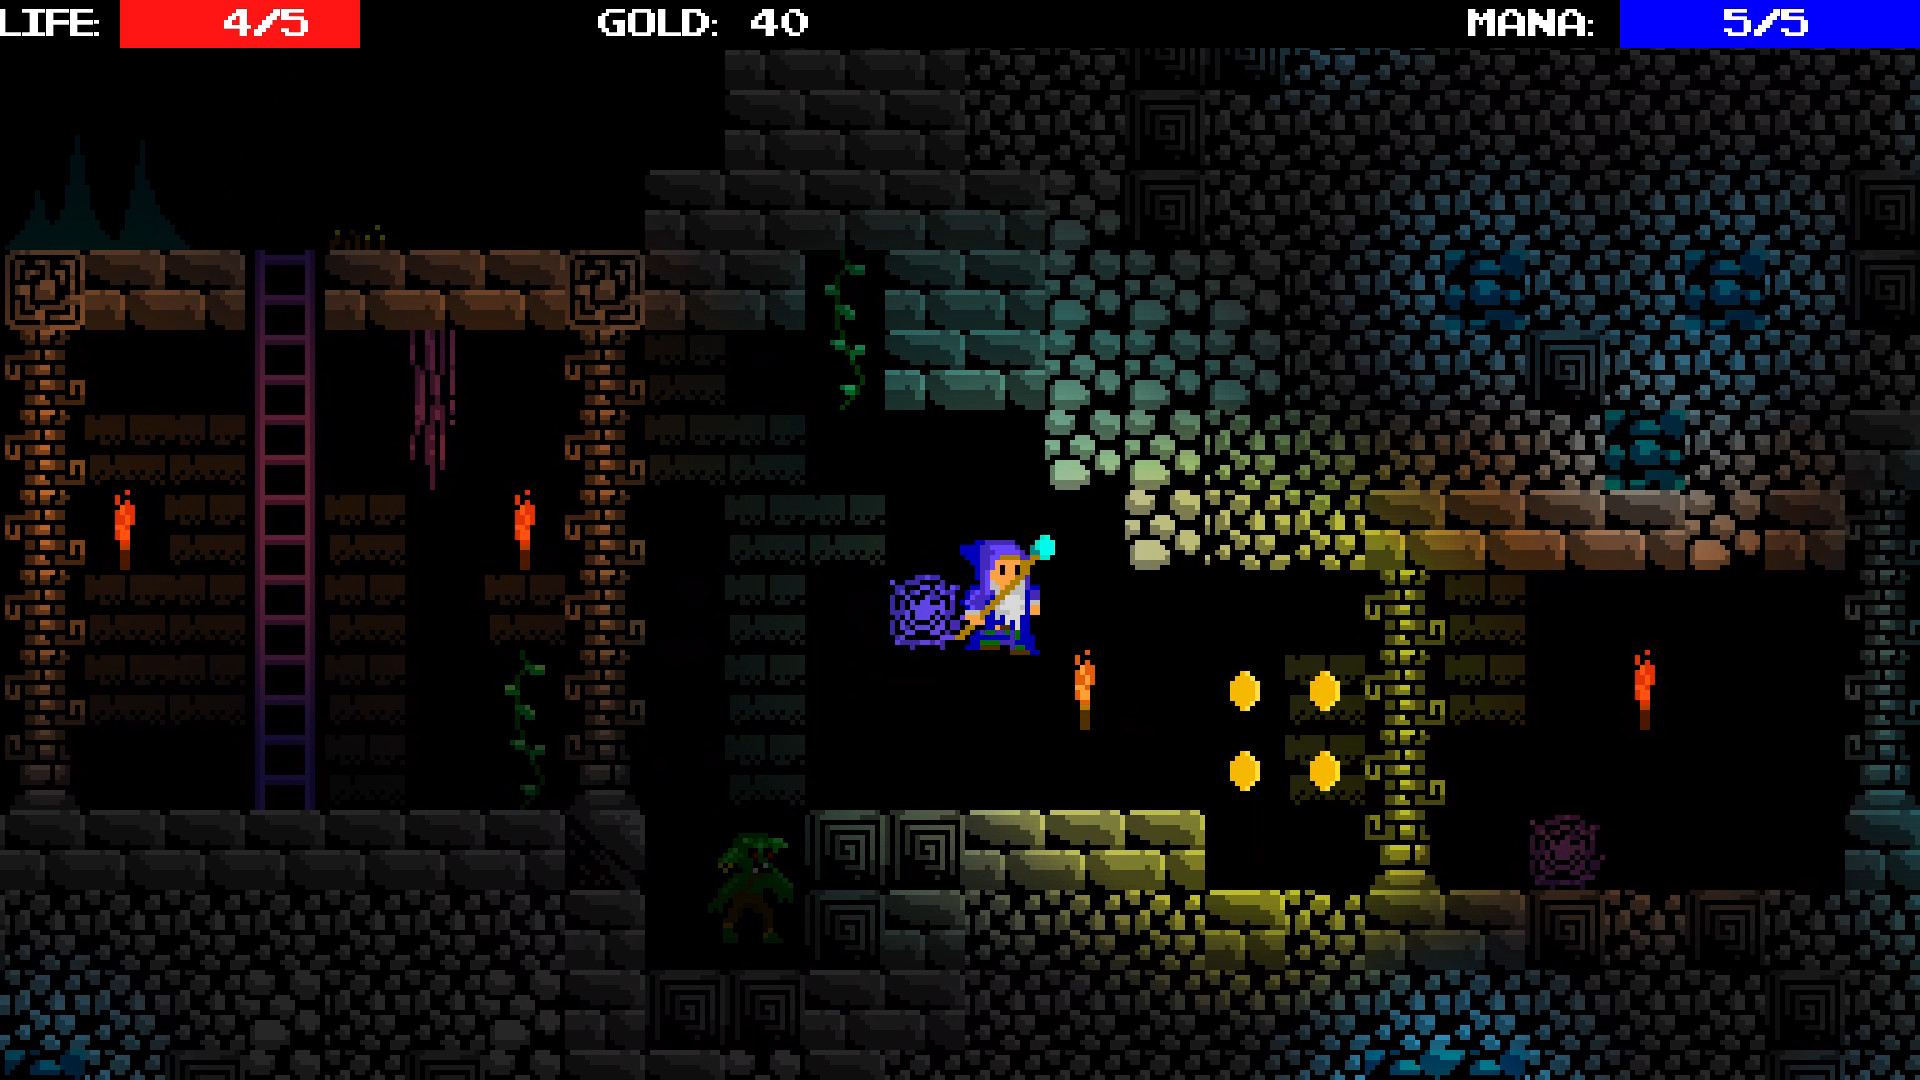 Wizcave Free Download